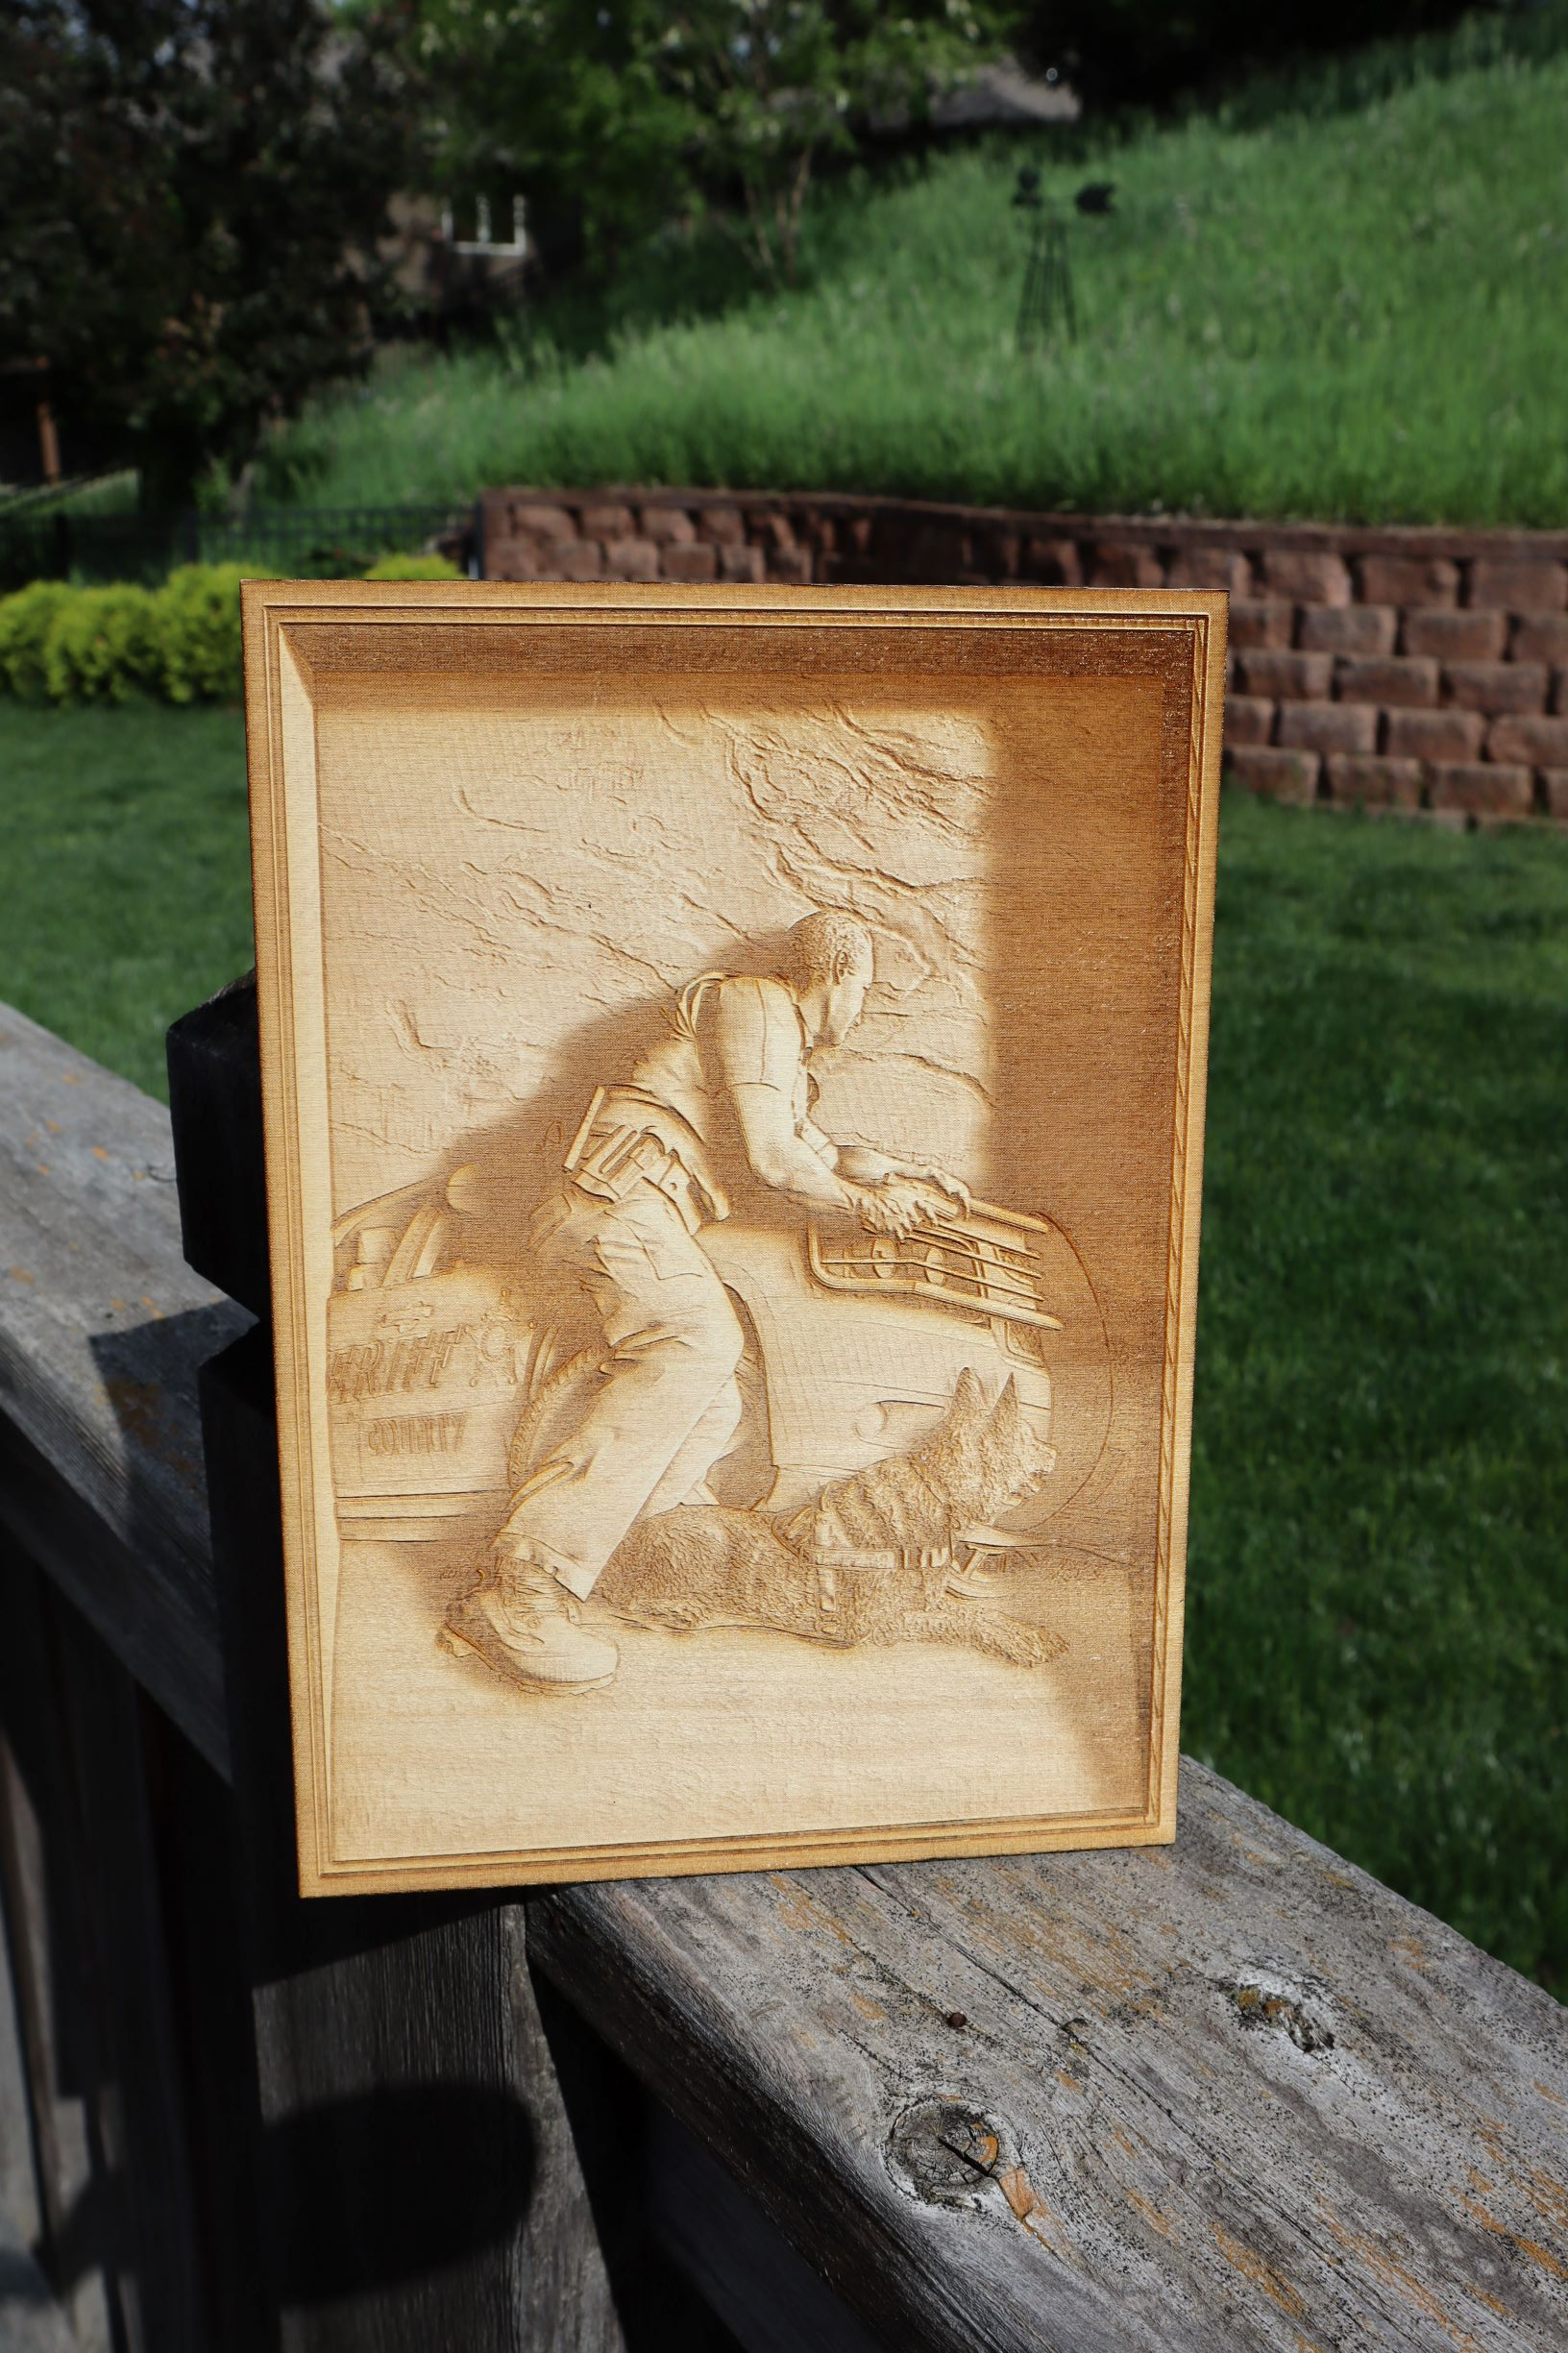 Frame from wood carving stock photo. Image of antique - 40734918